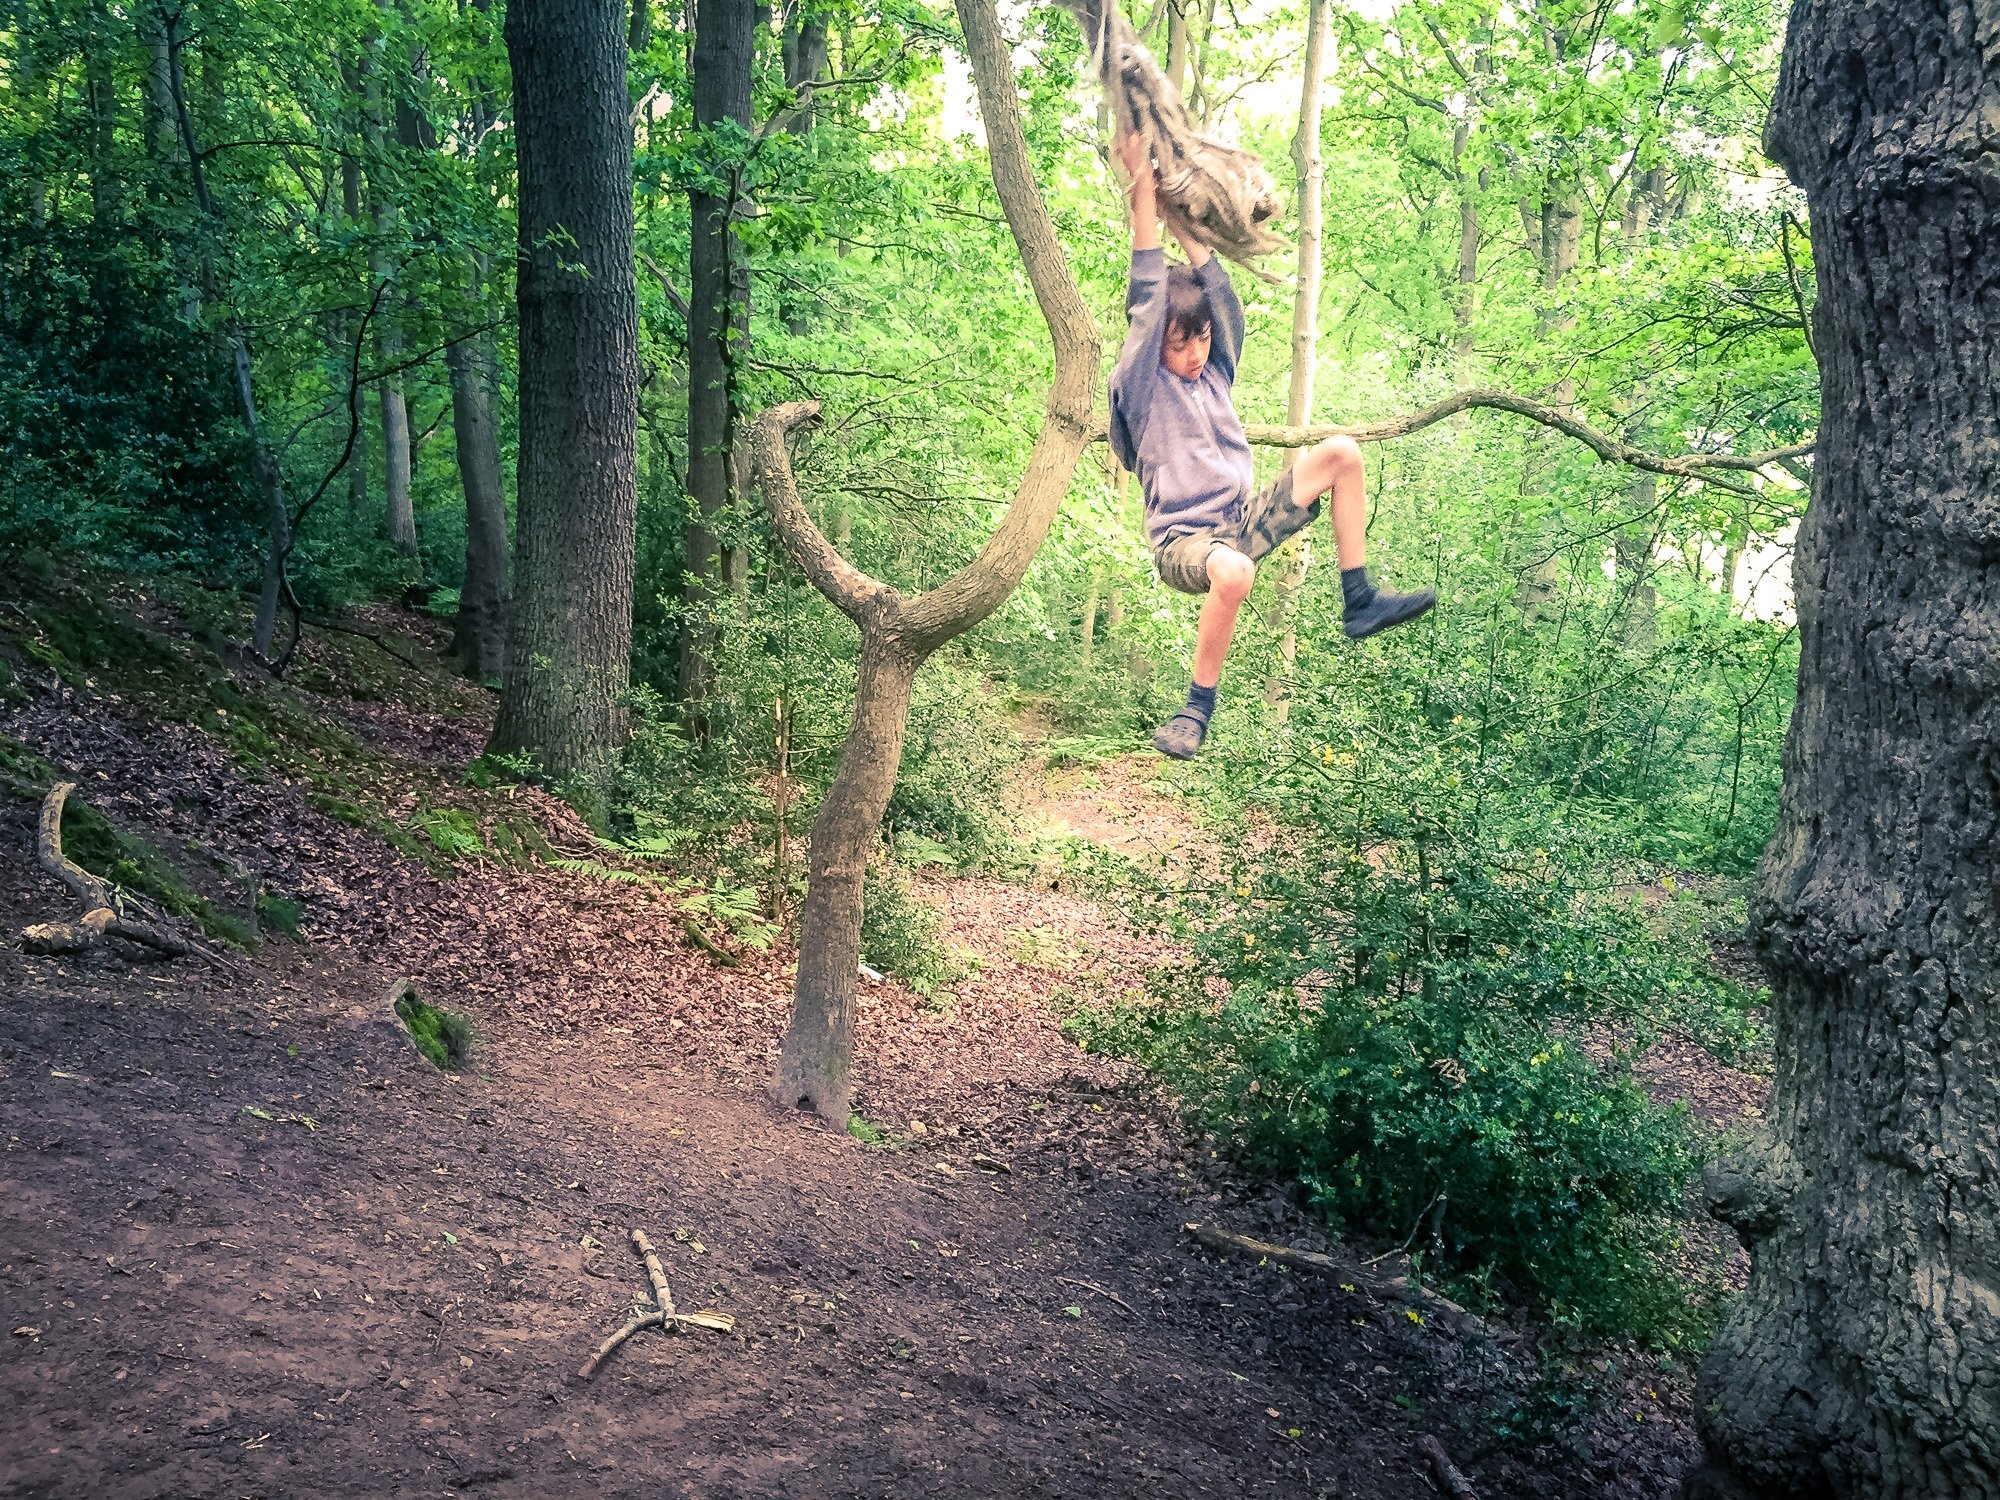  Enjoying the rope swing in the woods.